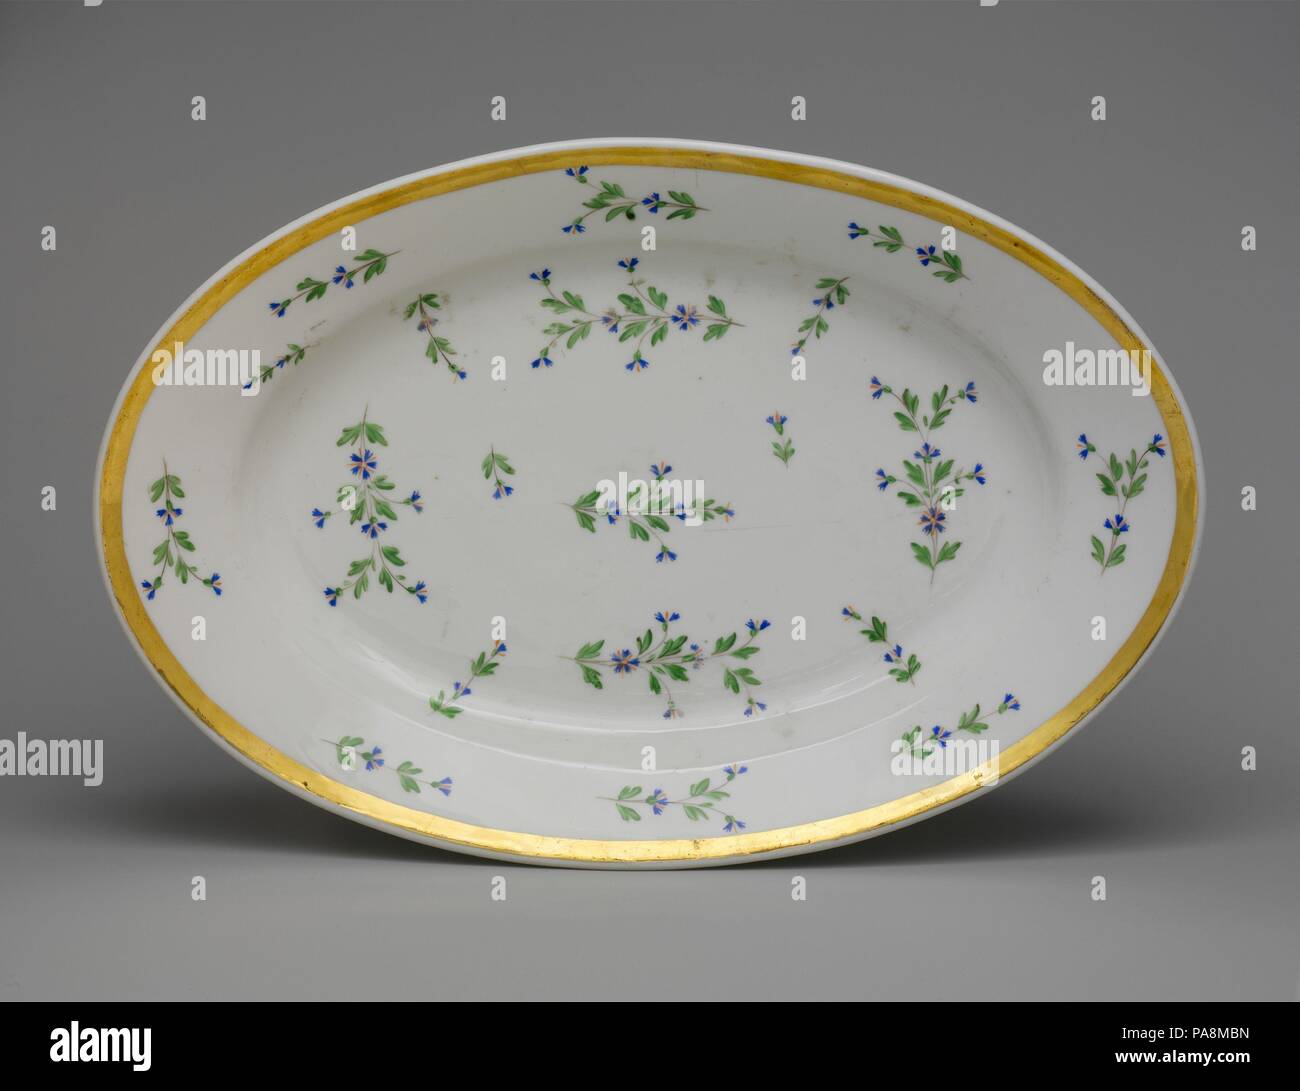 Platter. Culture: French. Dimensions: 1 15/16 x 14 1/4 x 9 15/16 in. (4.9 x 36.2 x 25.2 cm). Date: 1815-30. Museum: Metropolitan Museum of Art, New York, USA. Stock Photo